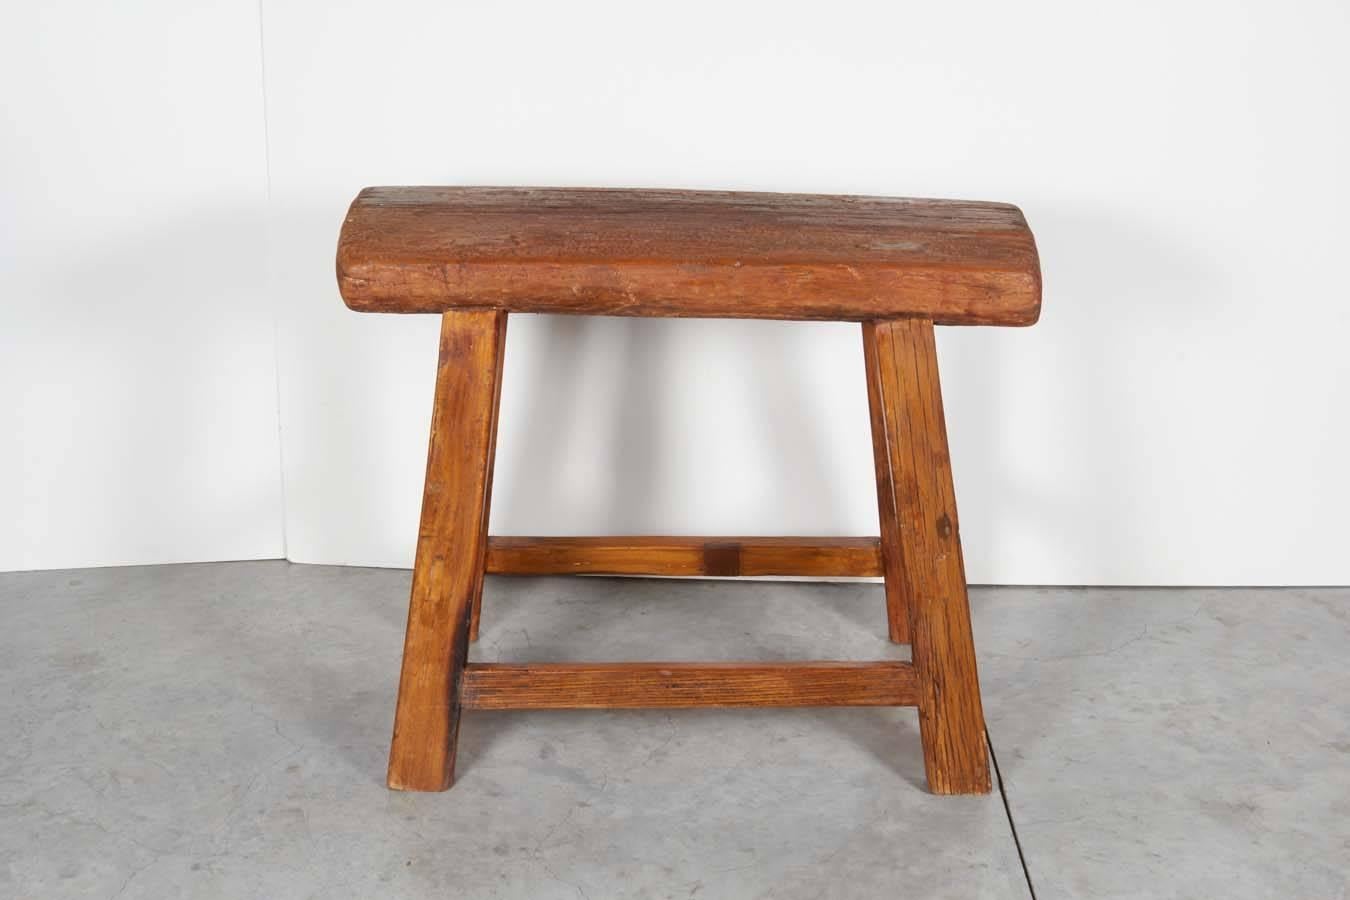 An unusually large antique Chinese stool/ bench with thick elm seat and beautiful, dark patina. Great entry piece with real presence. from Shanxi Province, circa 1900.
S478.